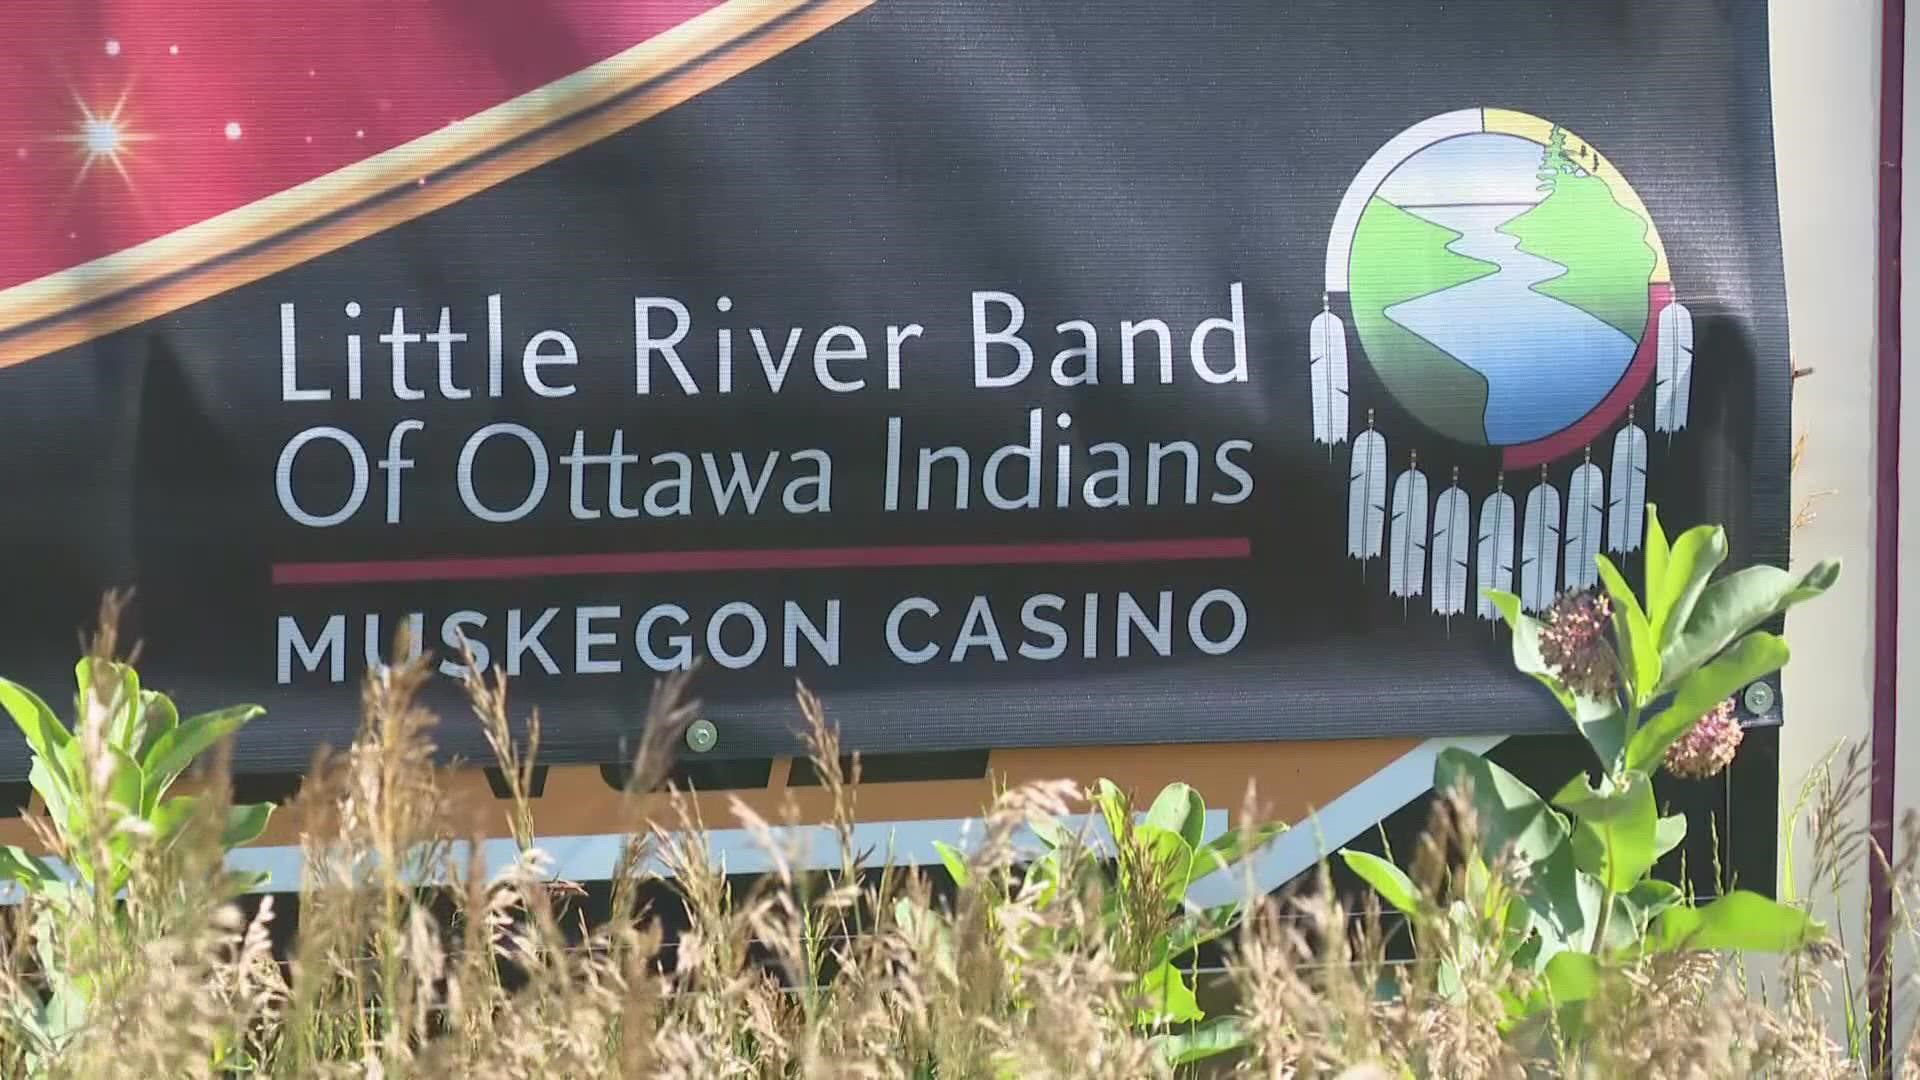 The Little River Band of Ottawa Indians tells 13 ON YOUR SIDE the Governor will ask for more time to approve or deny a proposed casino in Muskegon County.